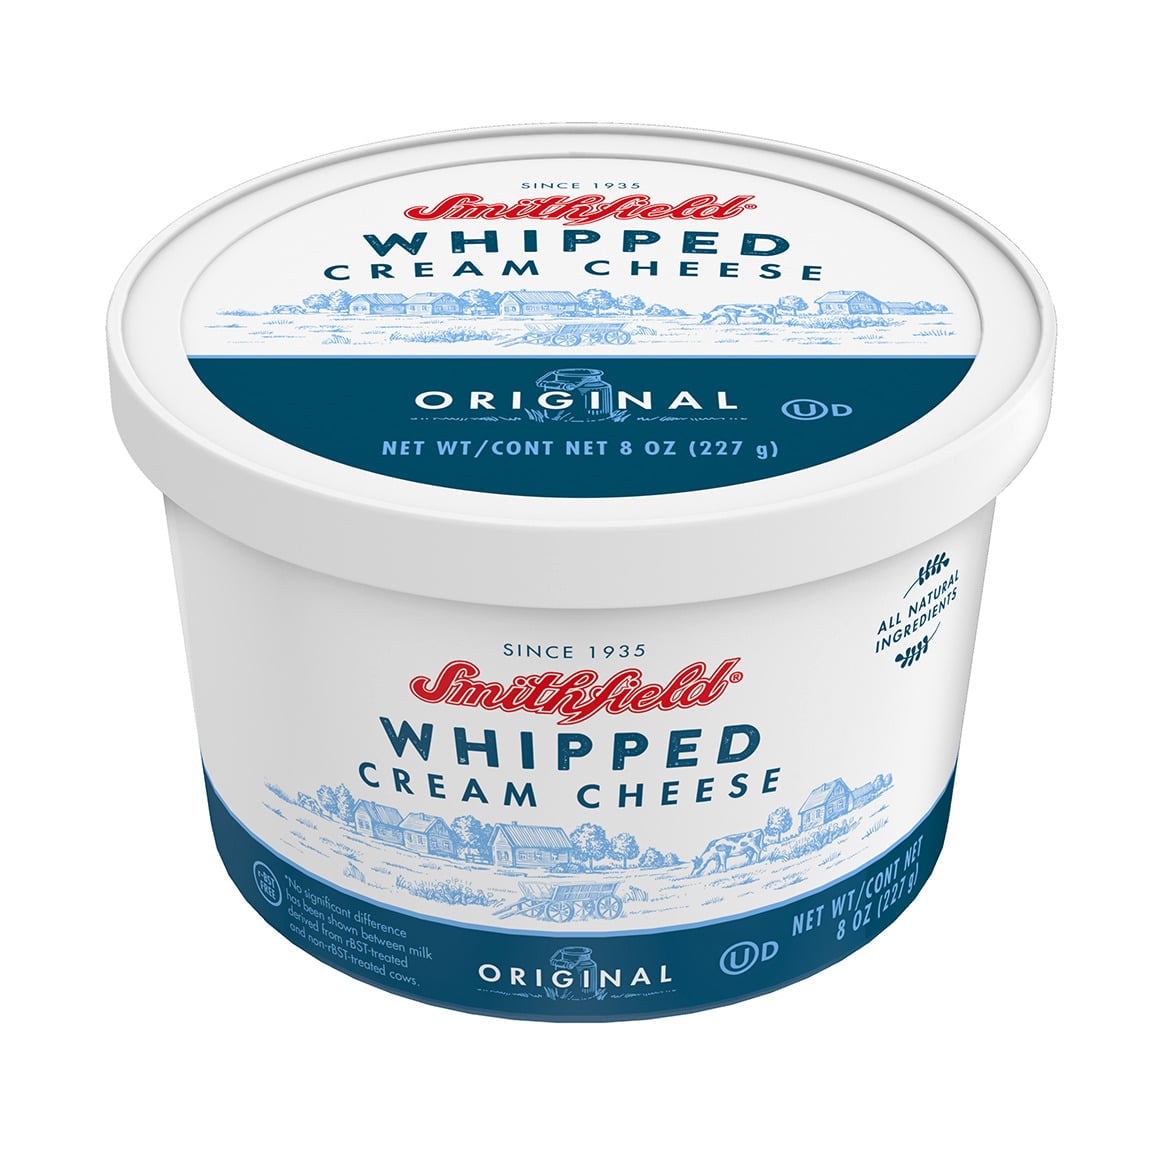 Smithfield whipped cream cheese packaging